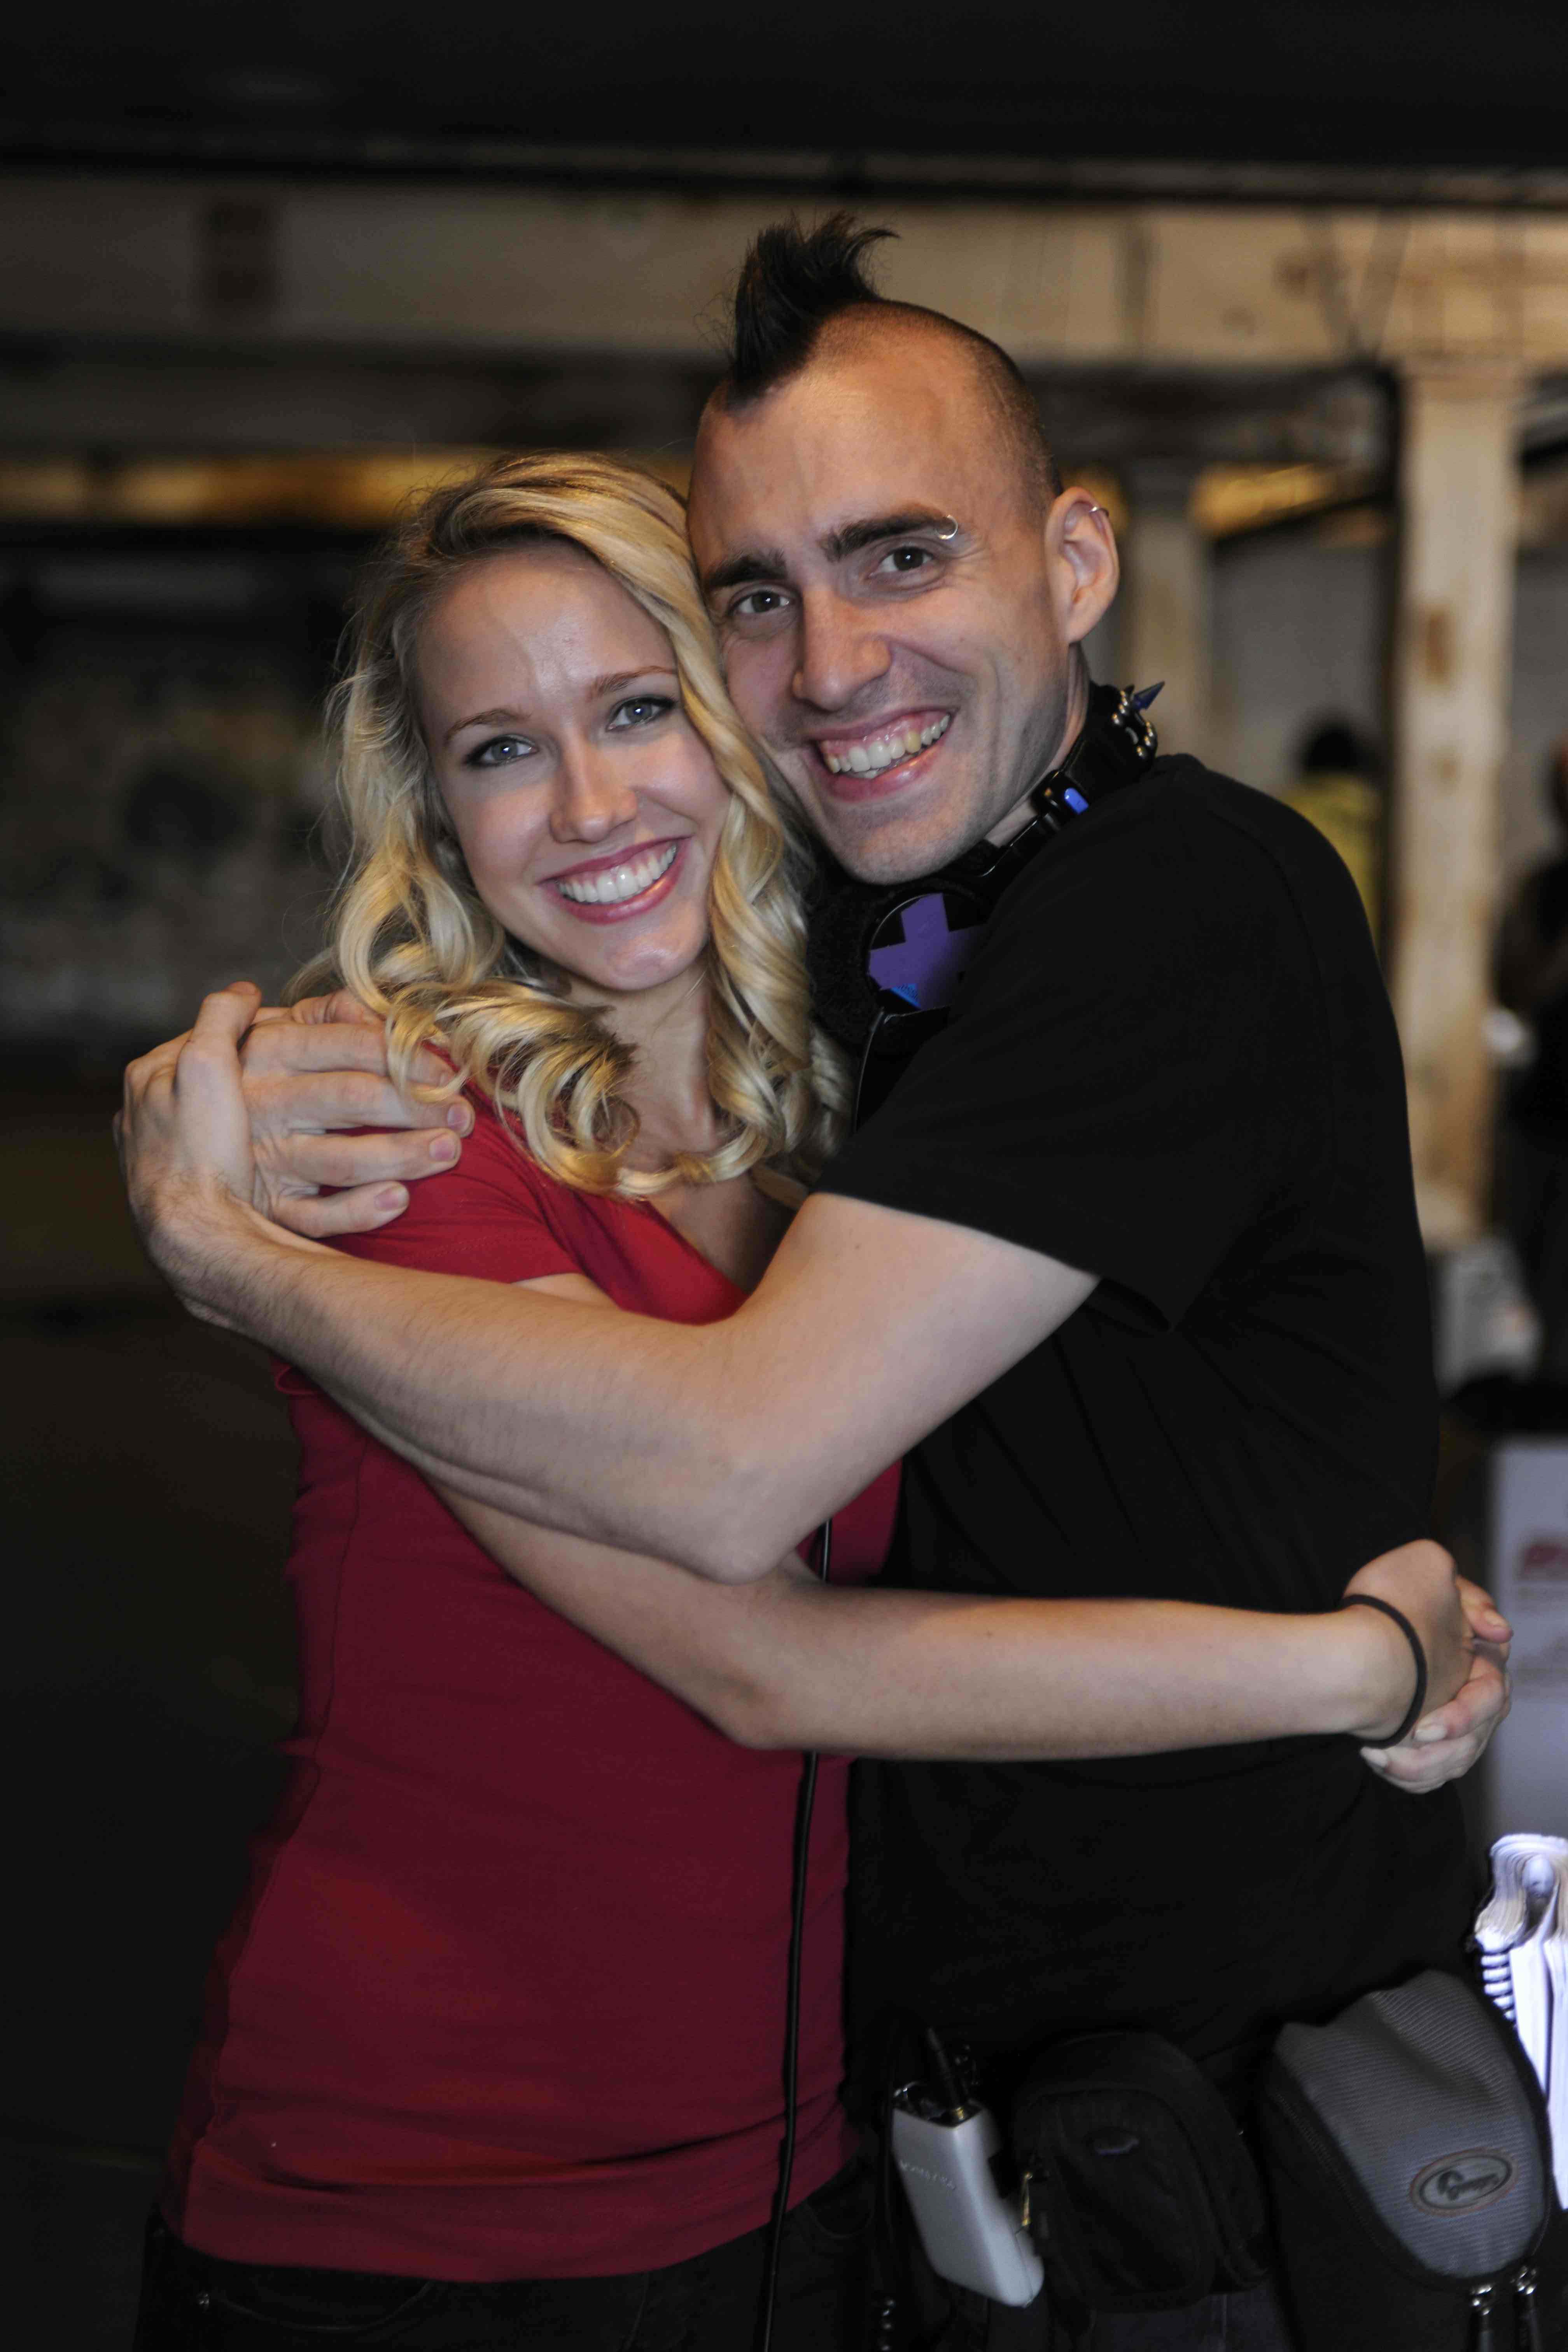 Director Nate Taylor with actor Anna Camp on the set of 